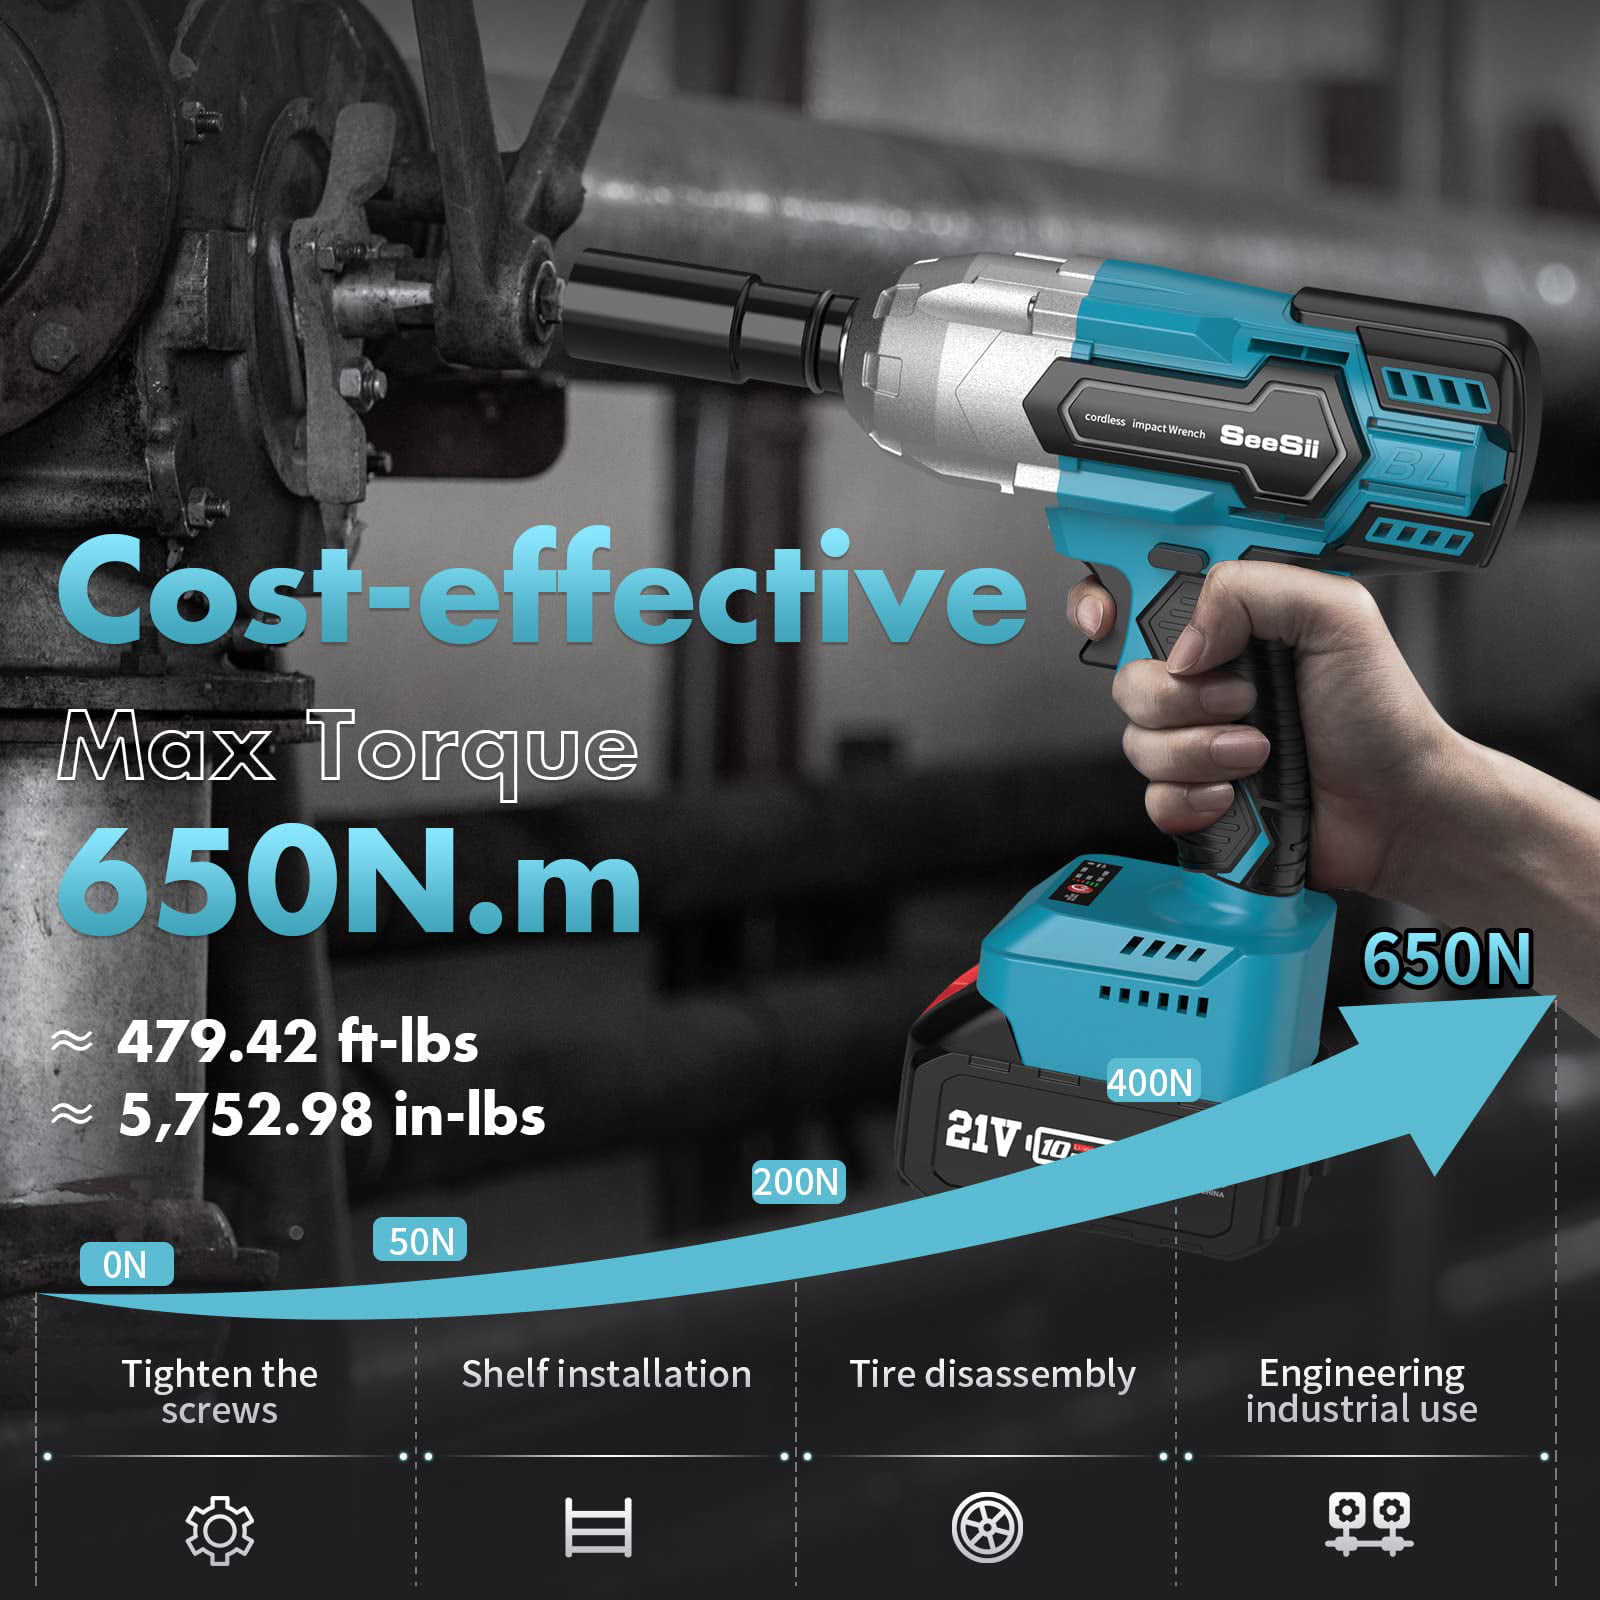 Power Cordless Impact Wrench 650Nm 1/2'', Seesii 3 in 1 Brushless